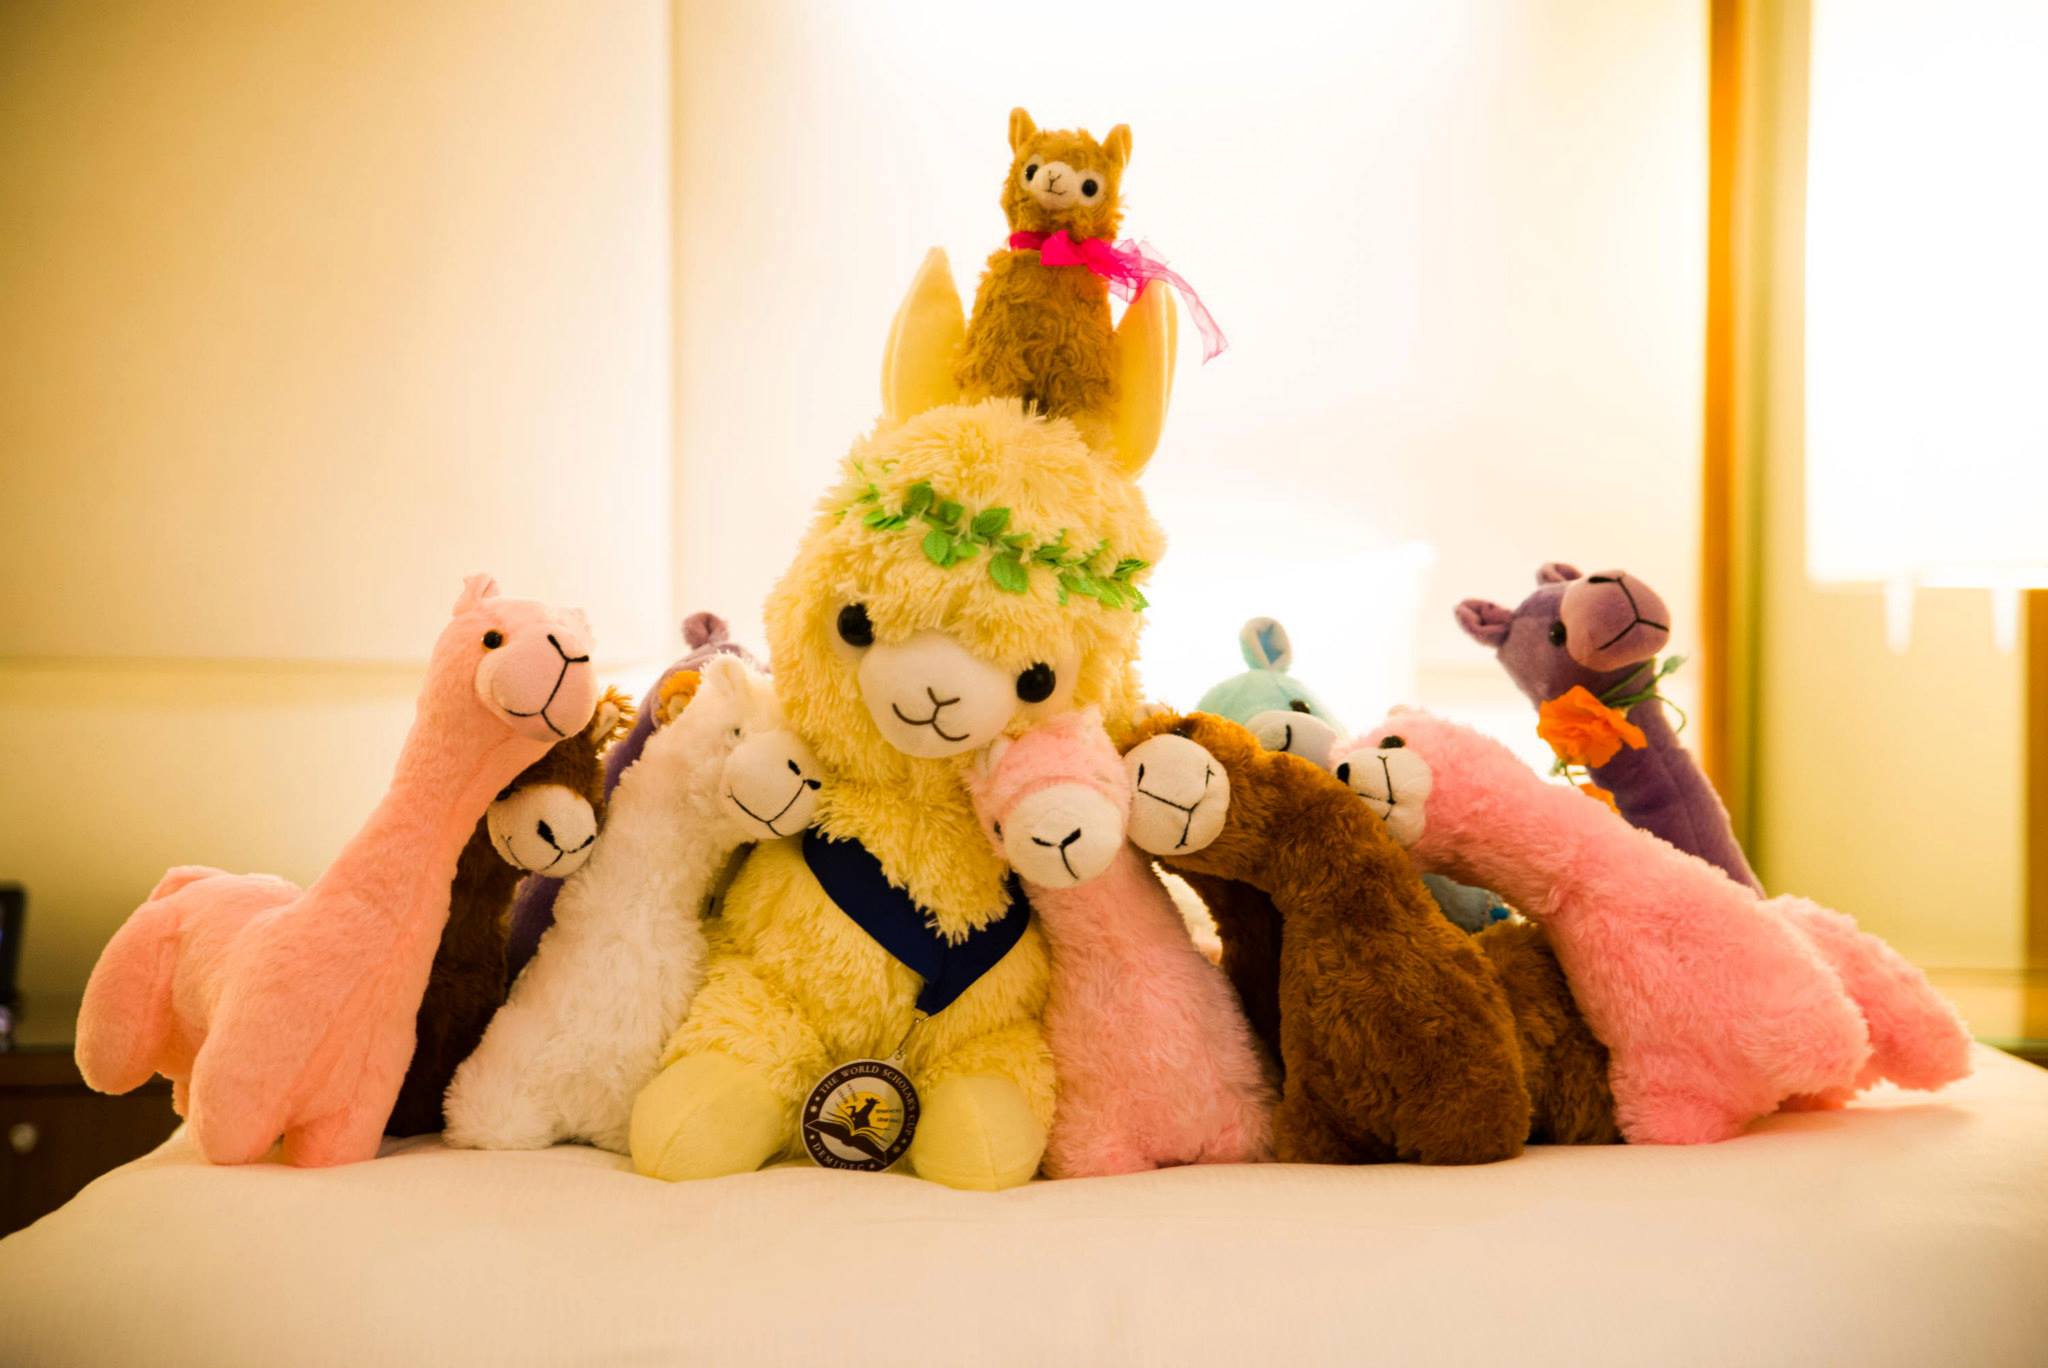 The Alpaca is the Mascot of the World Scholar's Cup